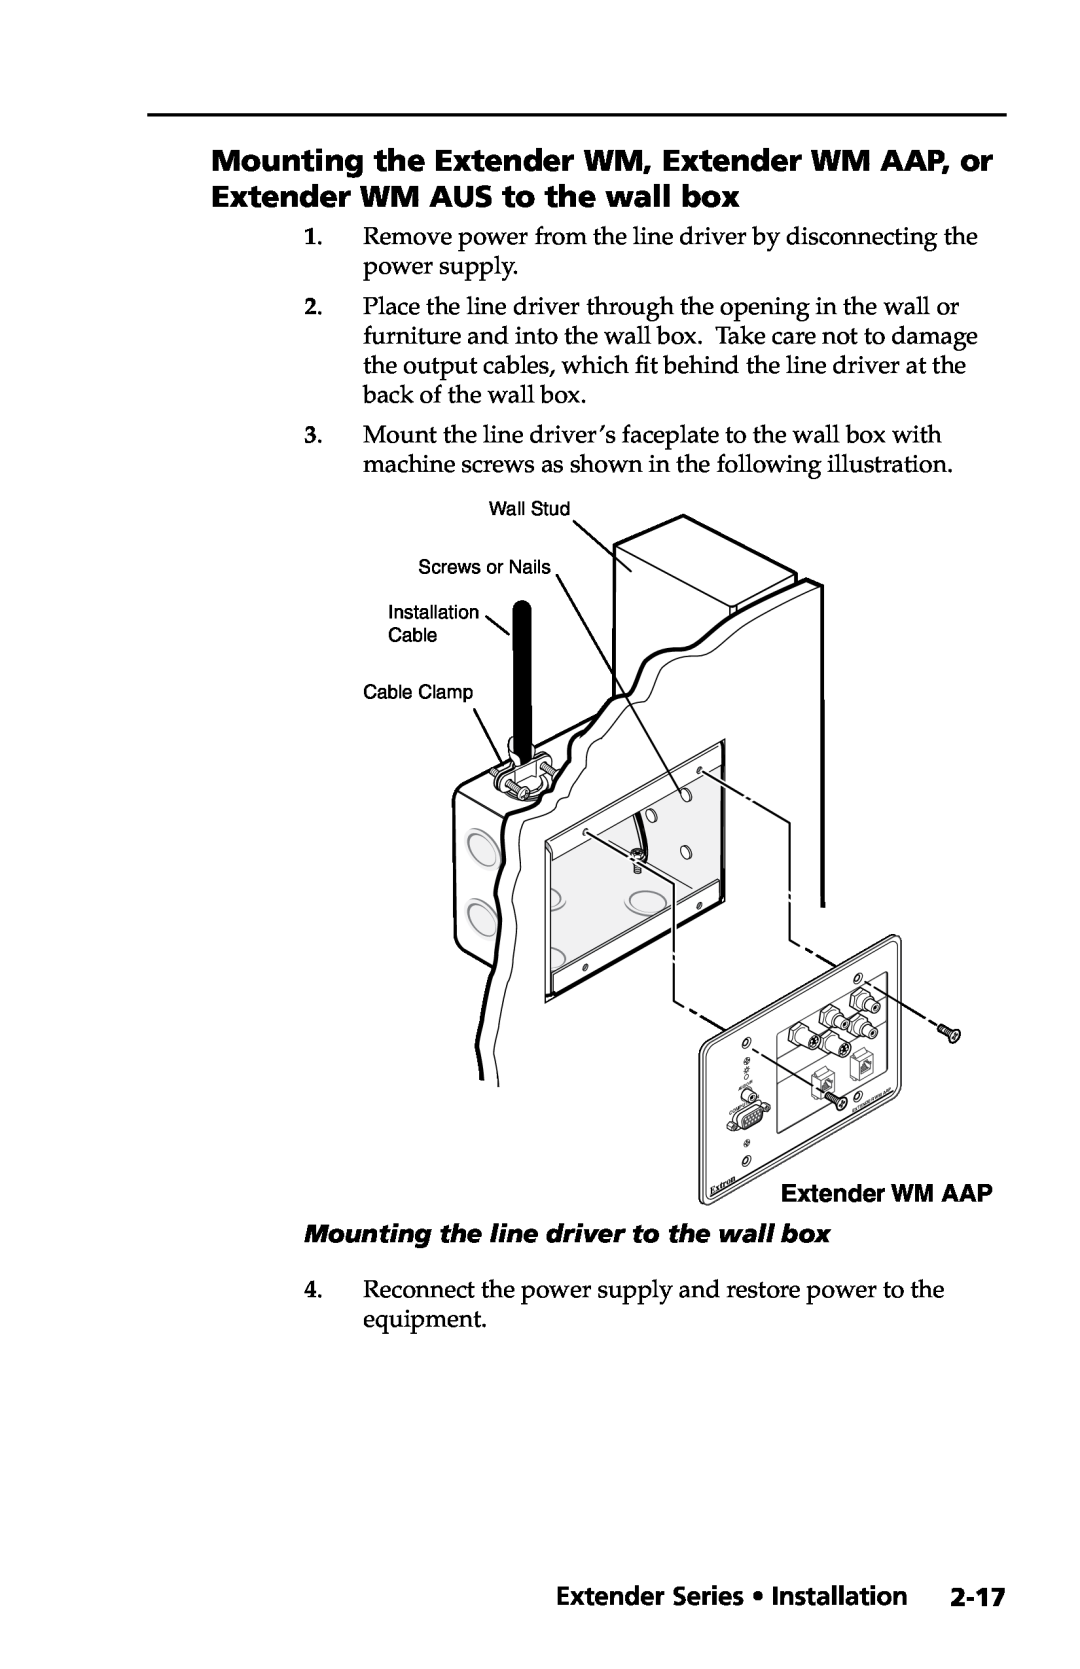 Extron electronic Extender Series manual 2-17, Preliminary, Extender WM AAP, Mounting the line driver to the wall box 